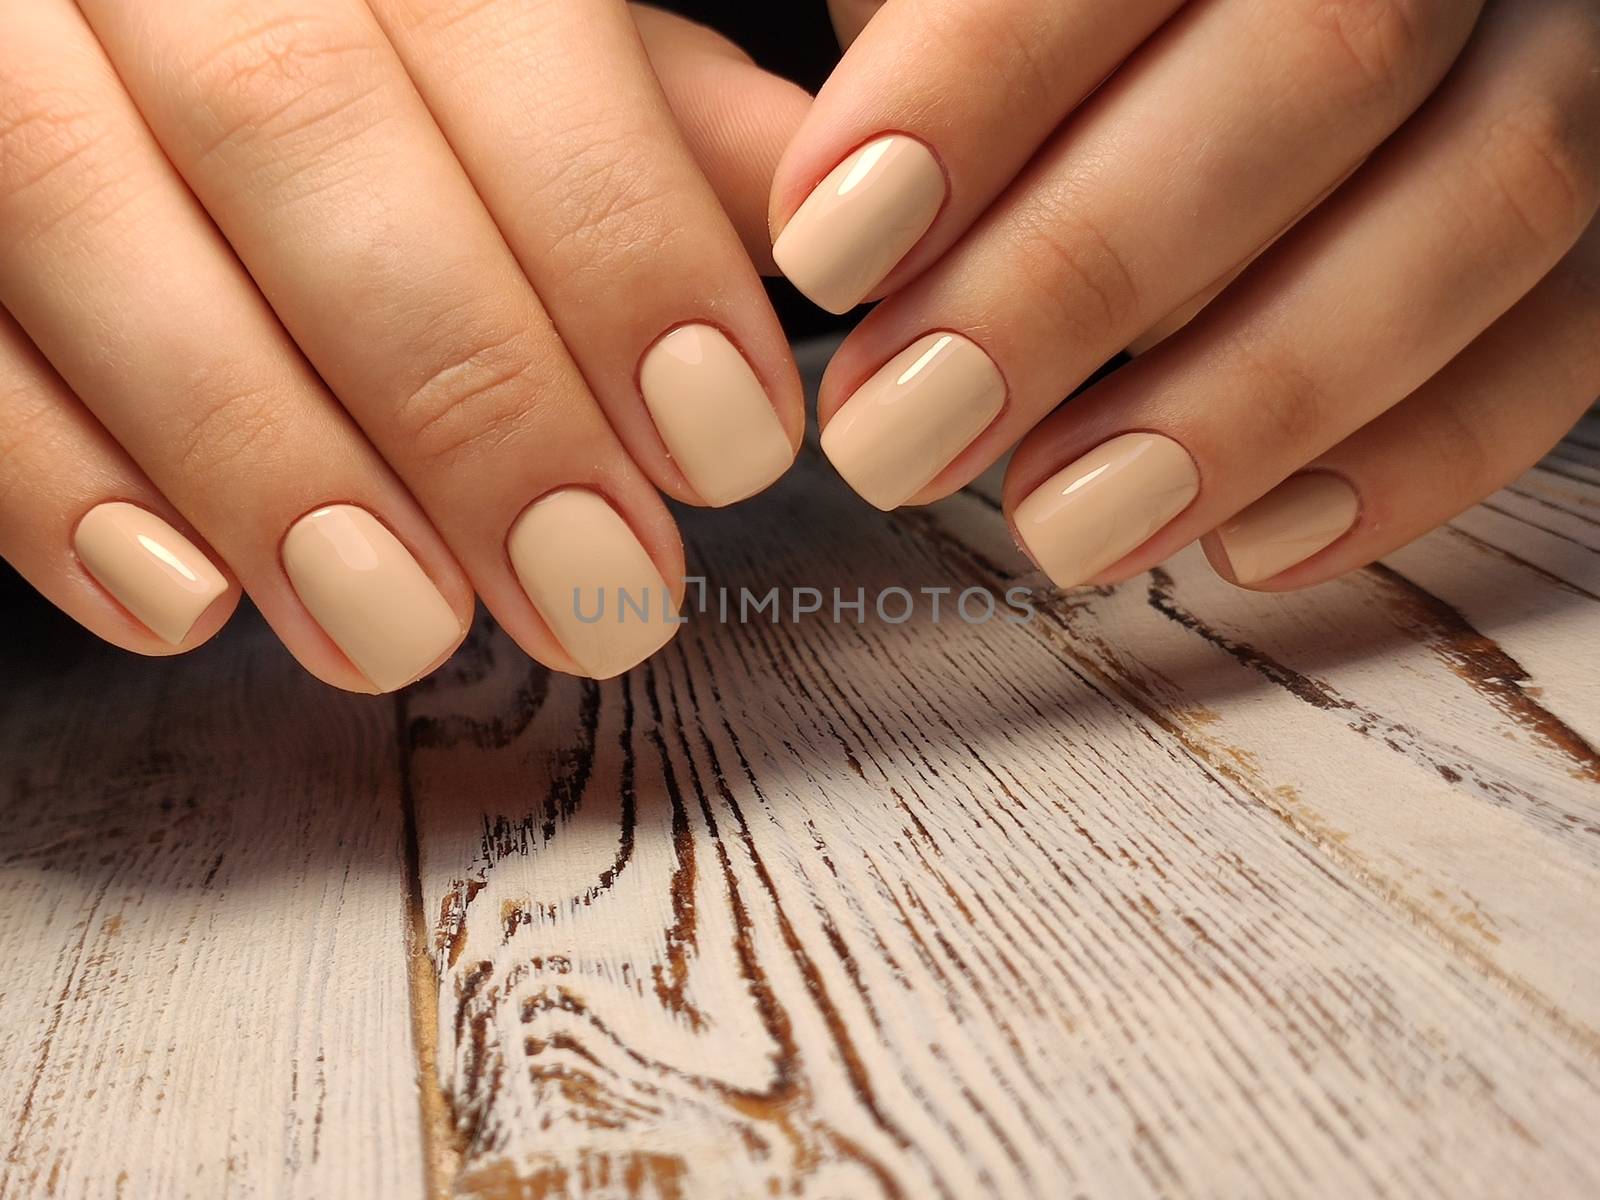 Youth manicure design, beautiful female hands with sexy manicure. by SmirMaxStock